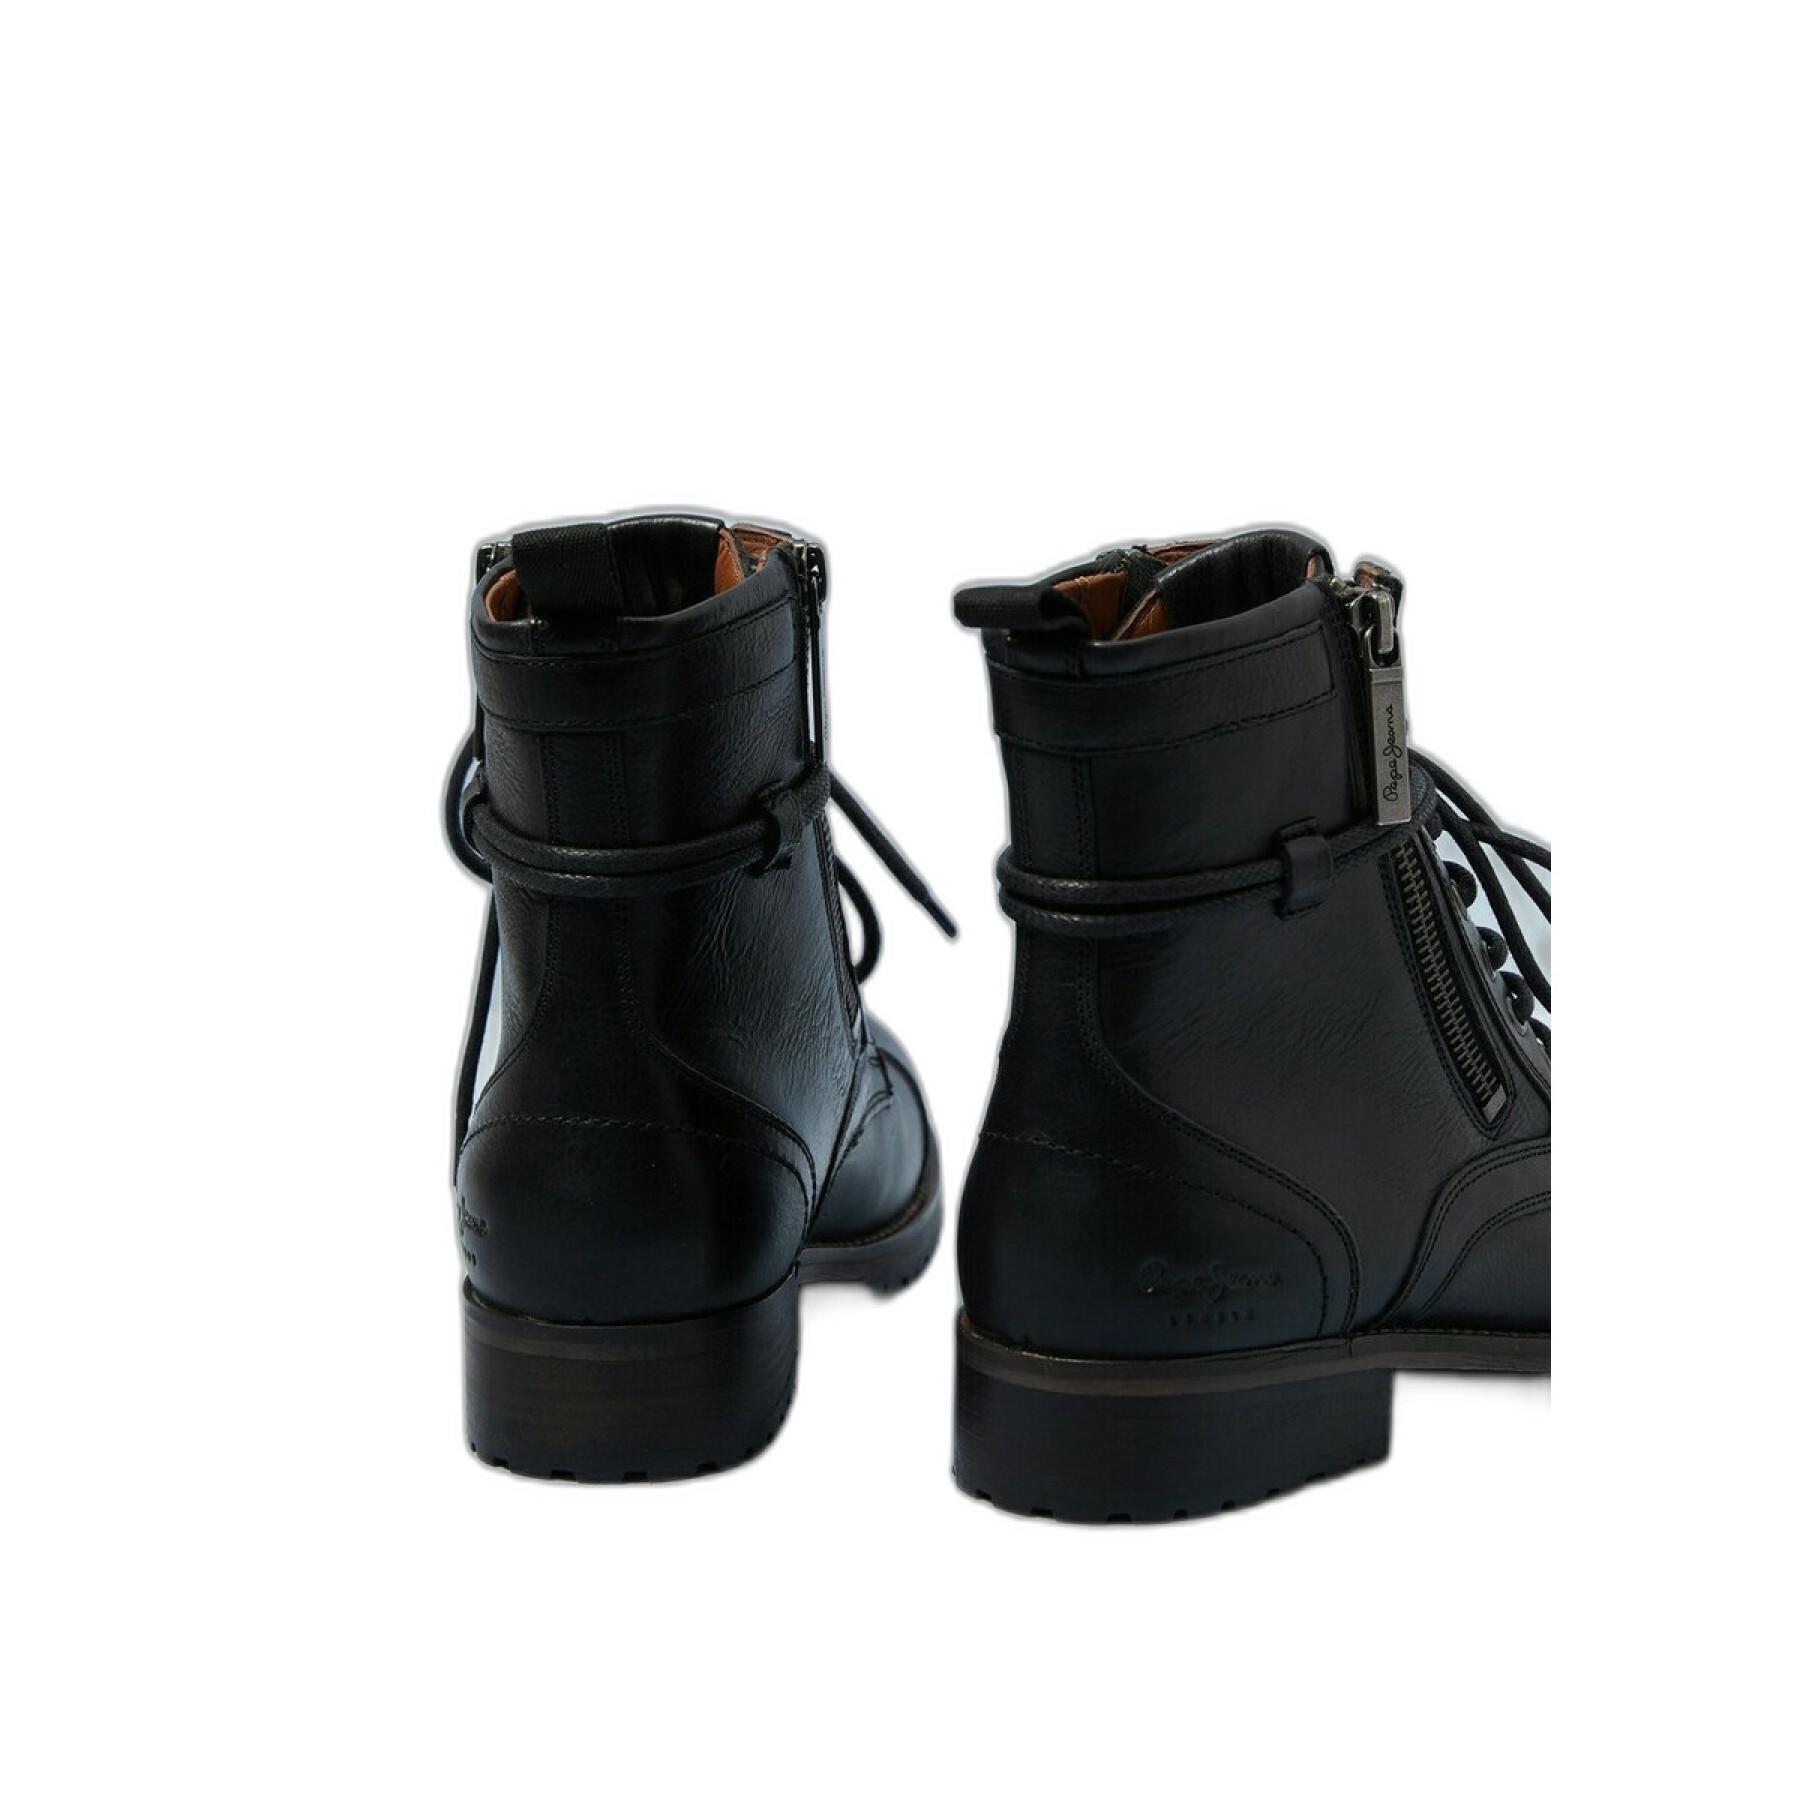 Women's zipped boots Pepe Jeans Melting